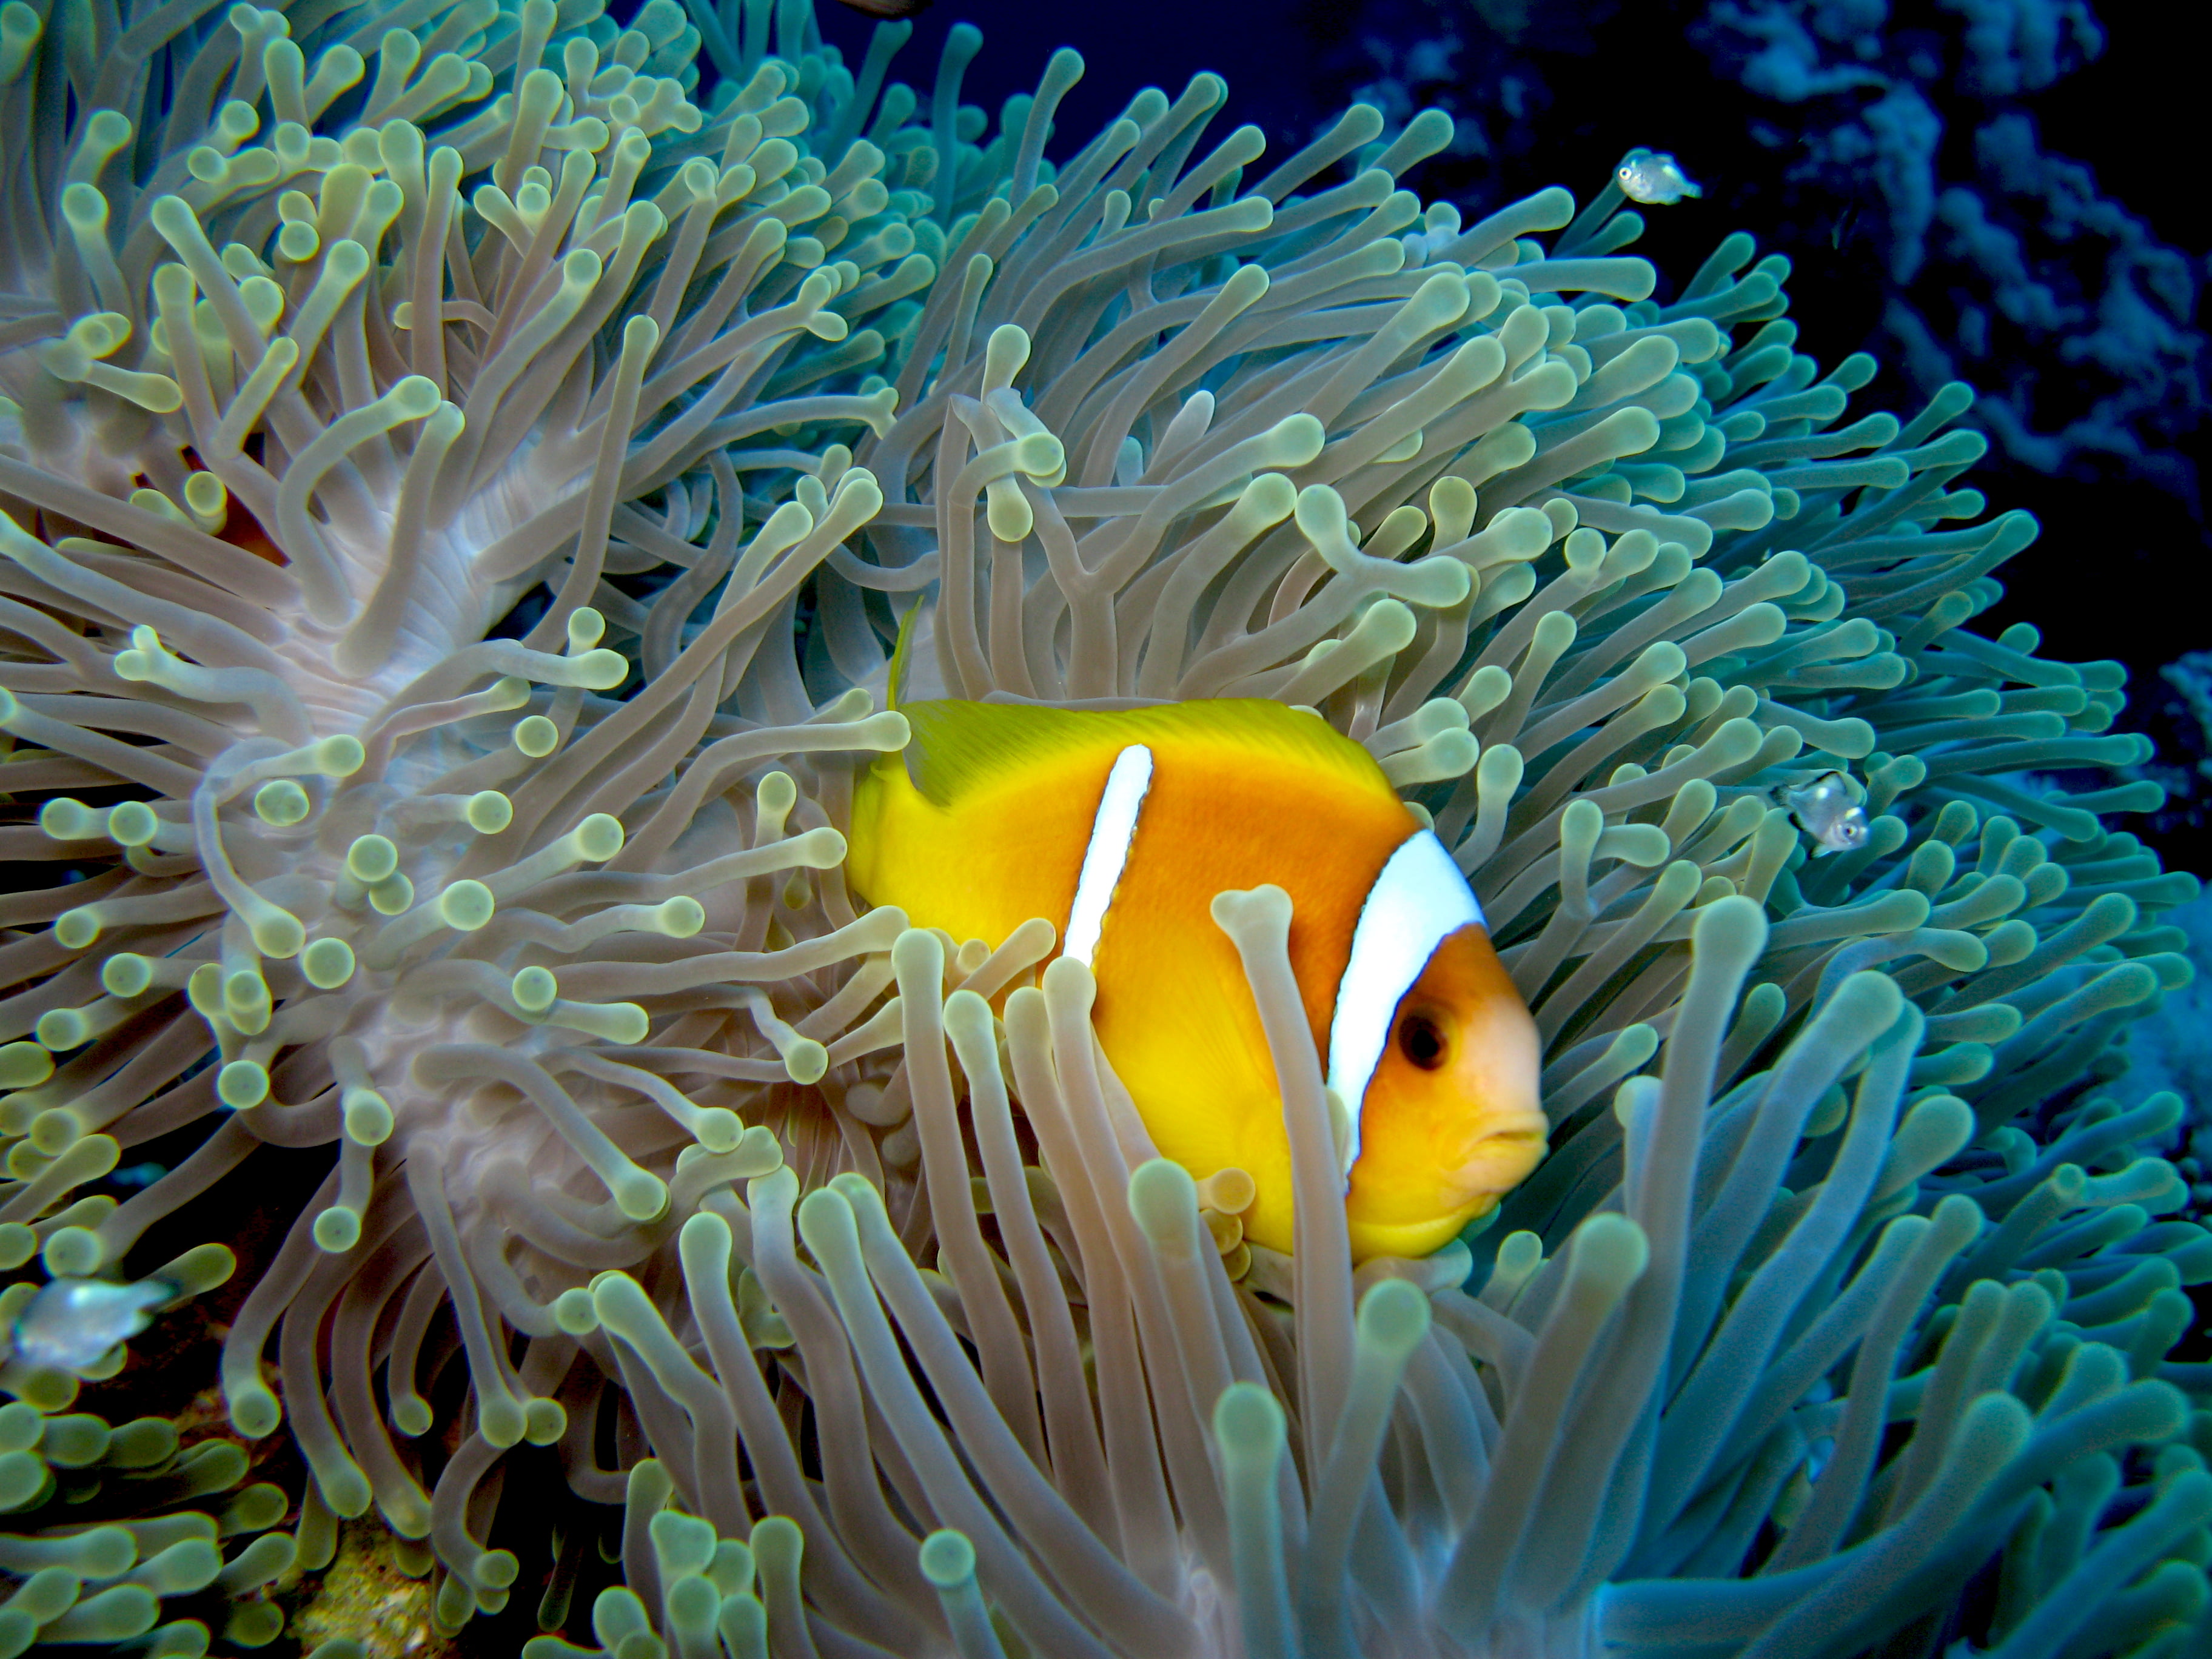 Clown Fish on coral reefs, anemonefish